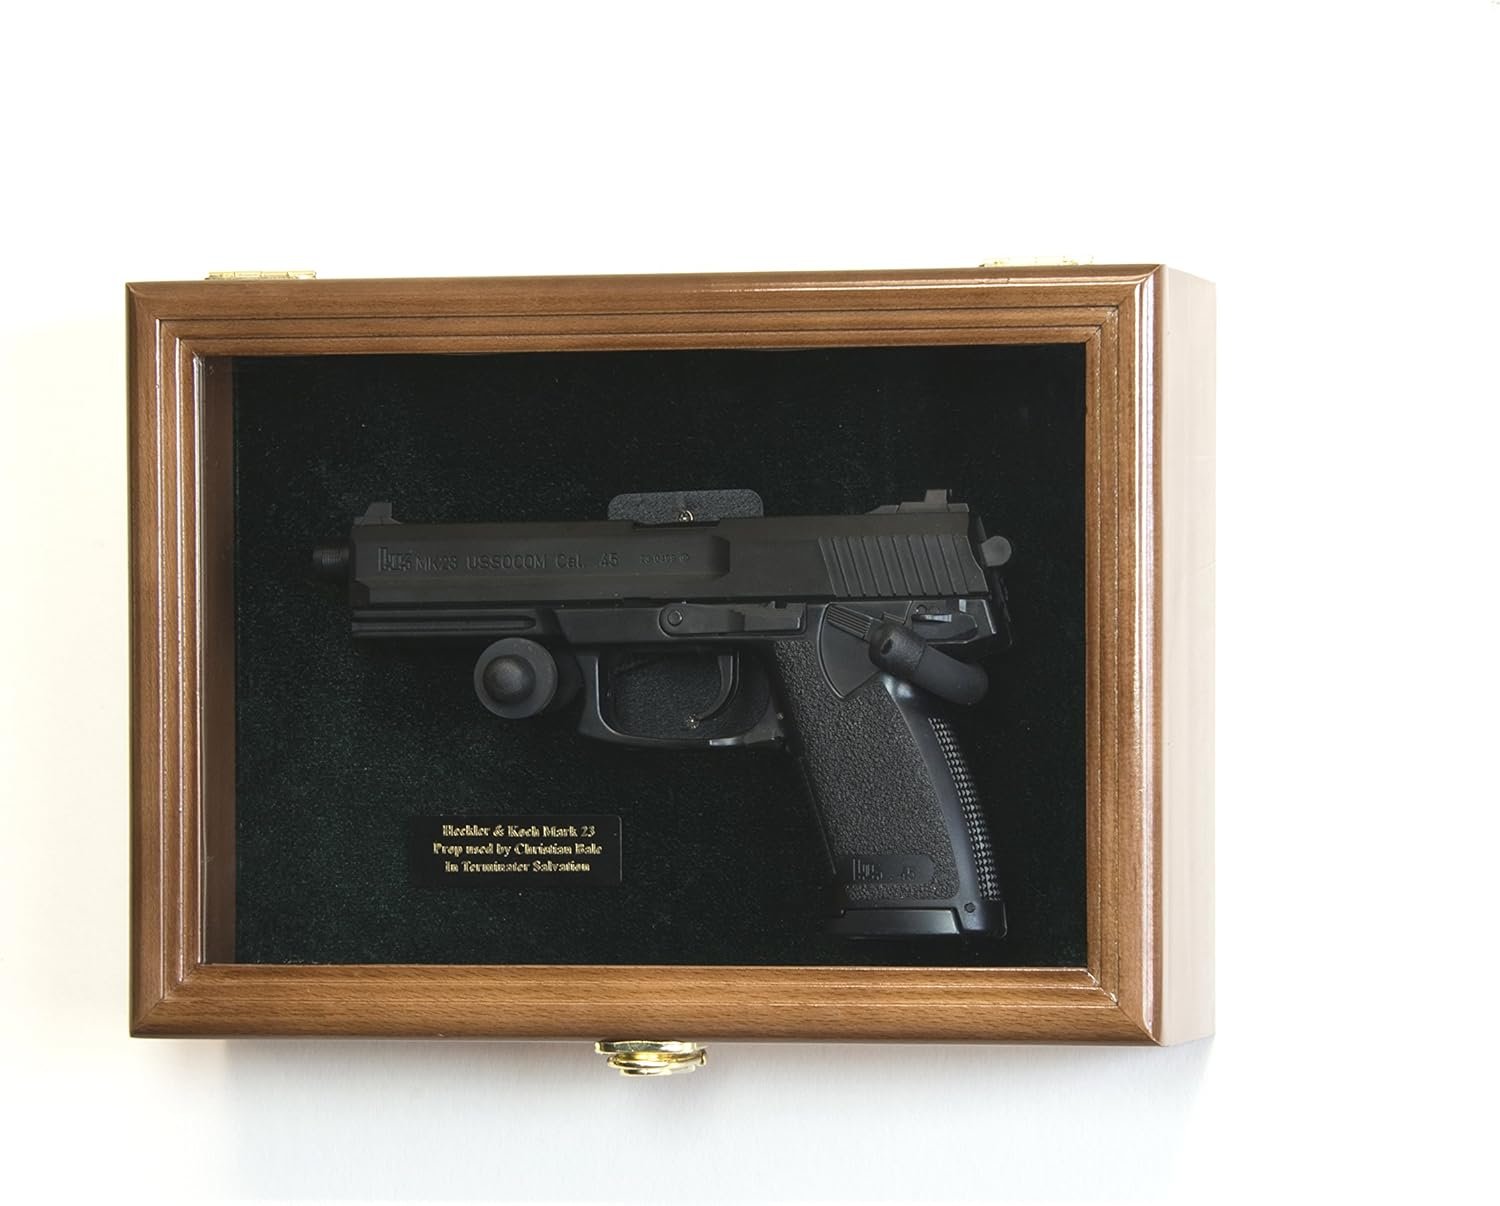 Single Pistol Display Case Wall Mount Review